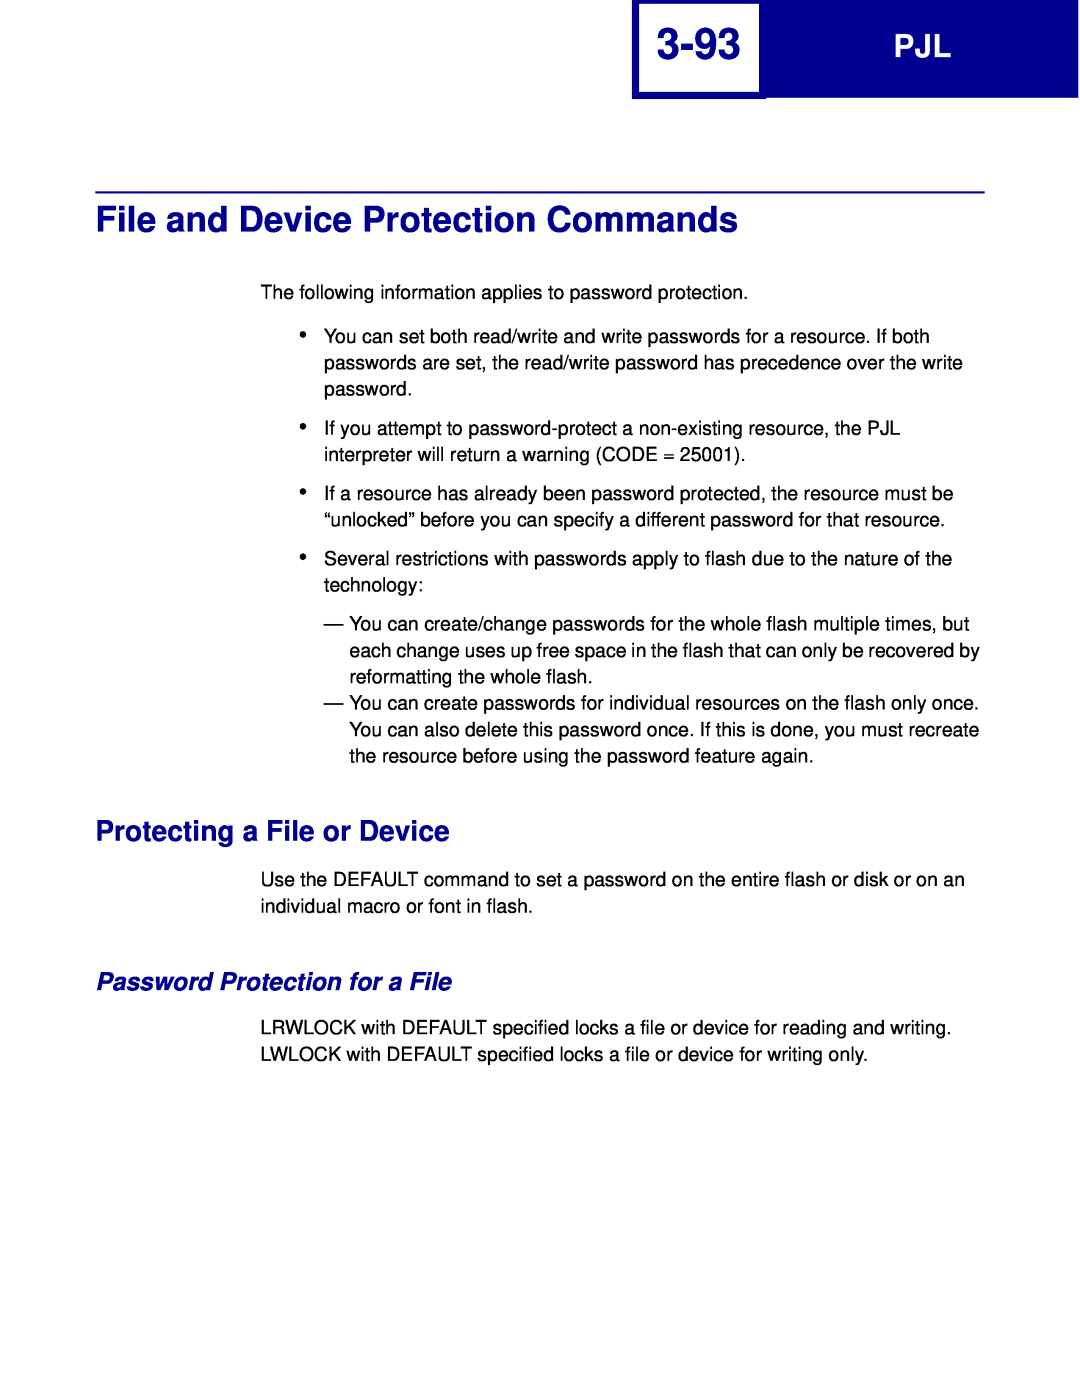 Lexmark C760, C762 3-93, File and Device Protection Commands, Protecting a File or Device, Password Protection for a File 